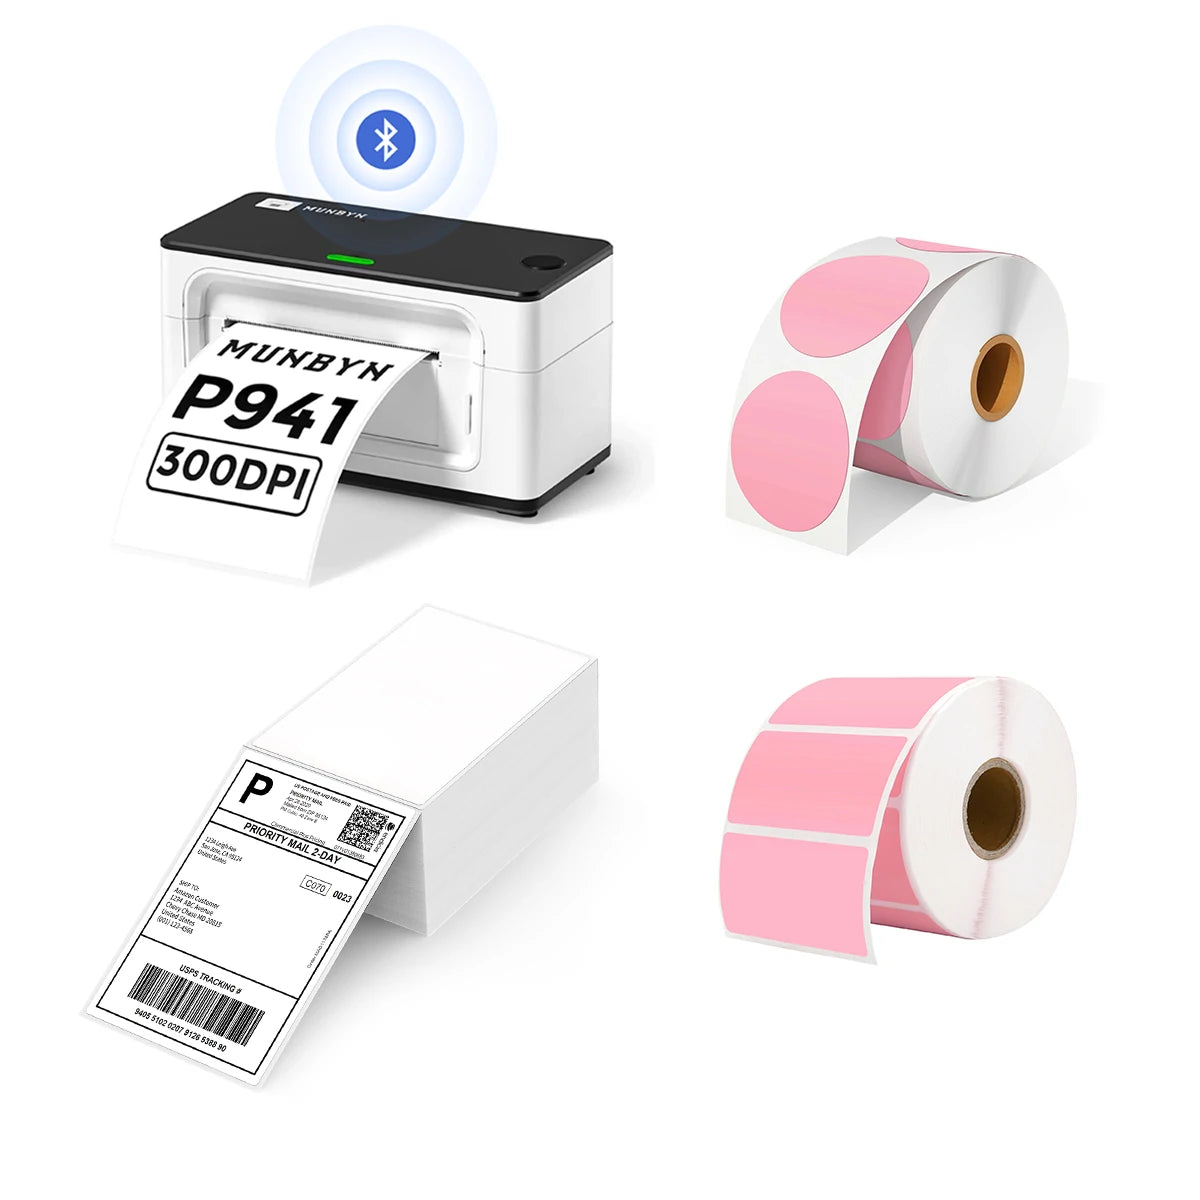 MUNBYN P941B Bluetooth Thermal Label Printer Kit includes a Bluetooth label printer, two rolls of pink labels, and a stack of shipping labels.